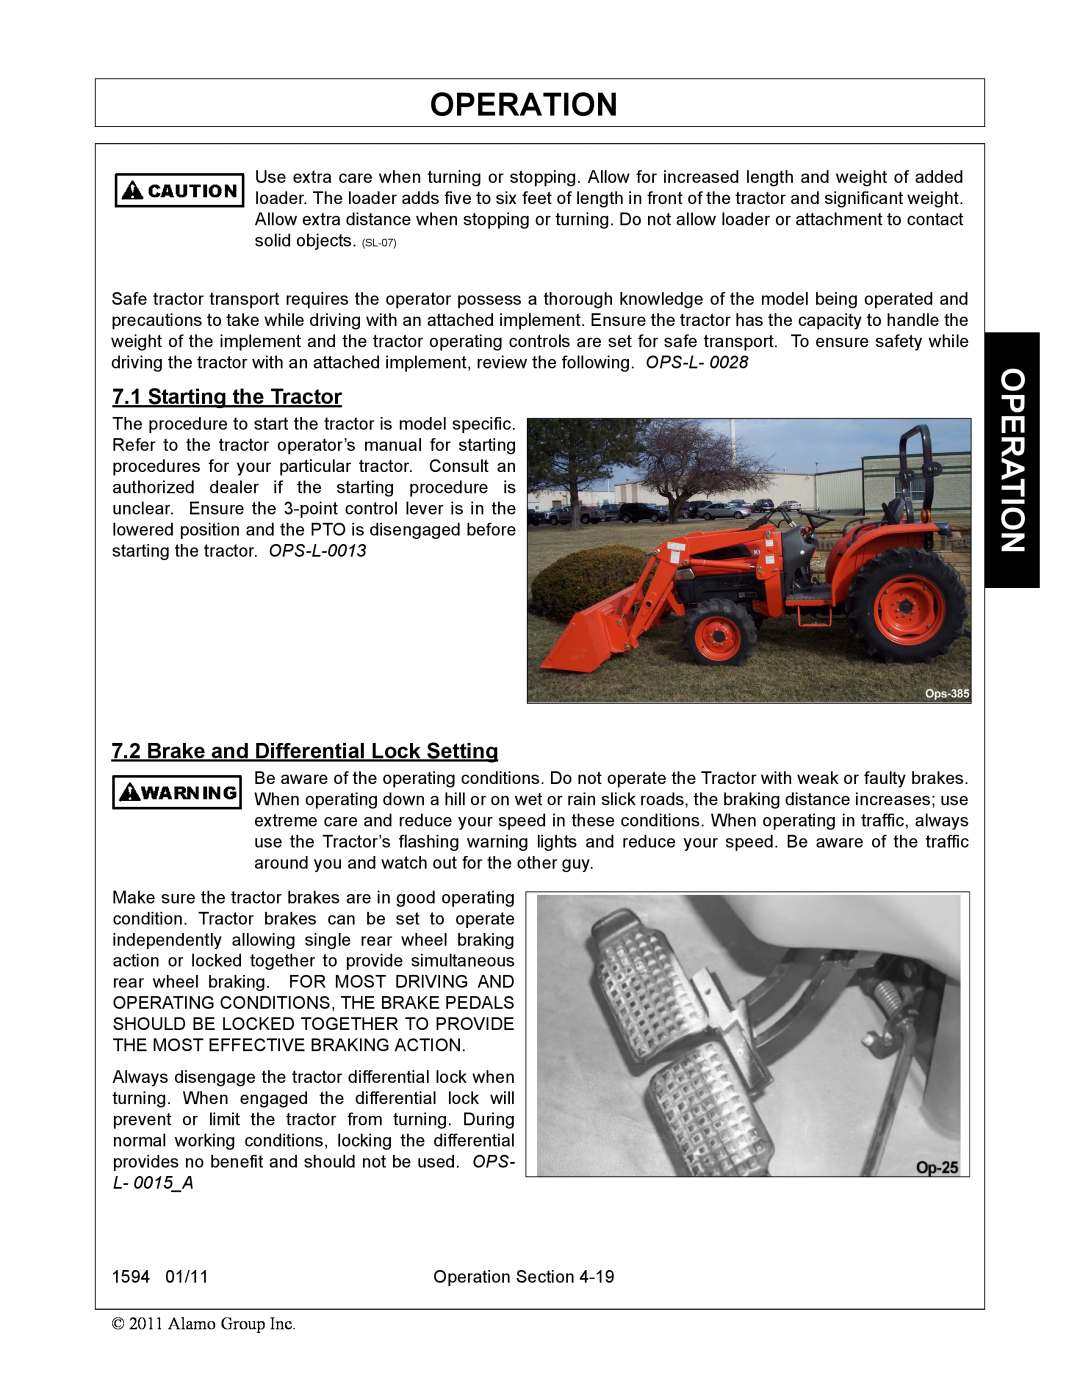 Rhino Mounts 1594 manual Operation, Starting the Tractor, Brake and Differential Lock Setting 